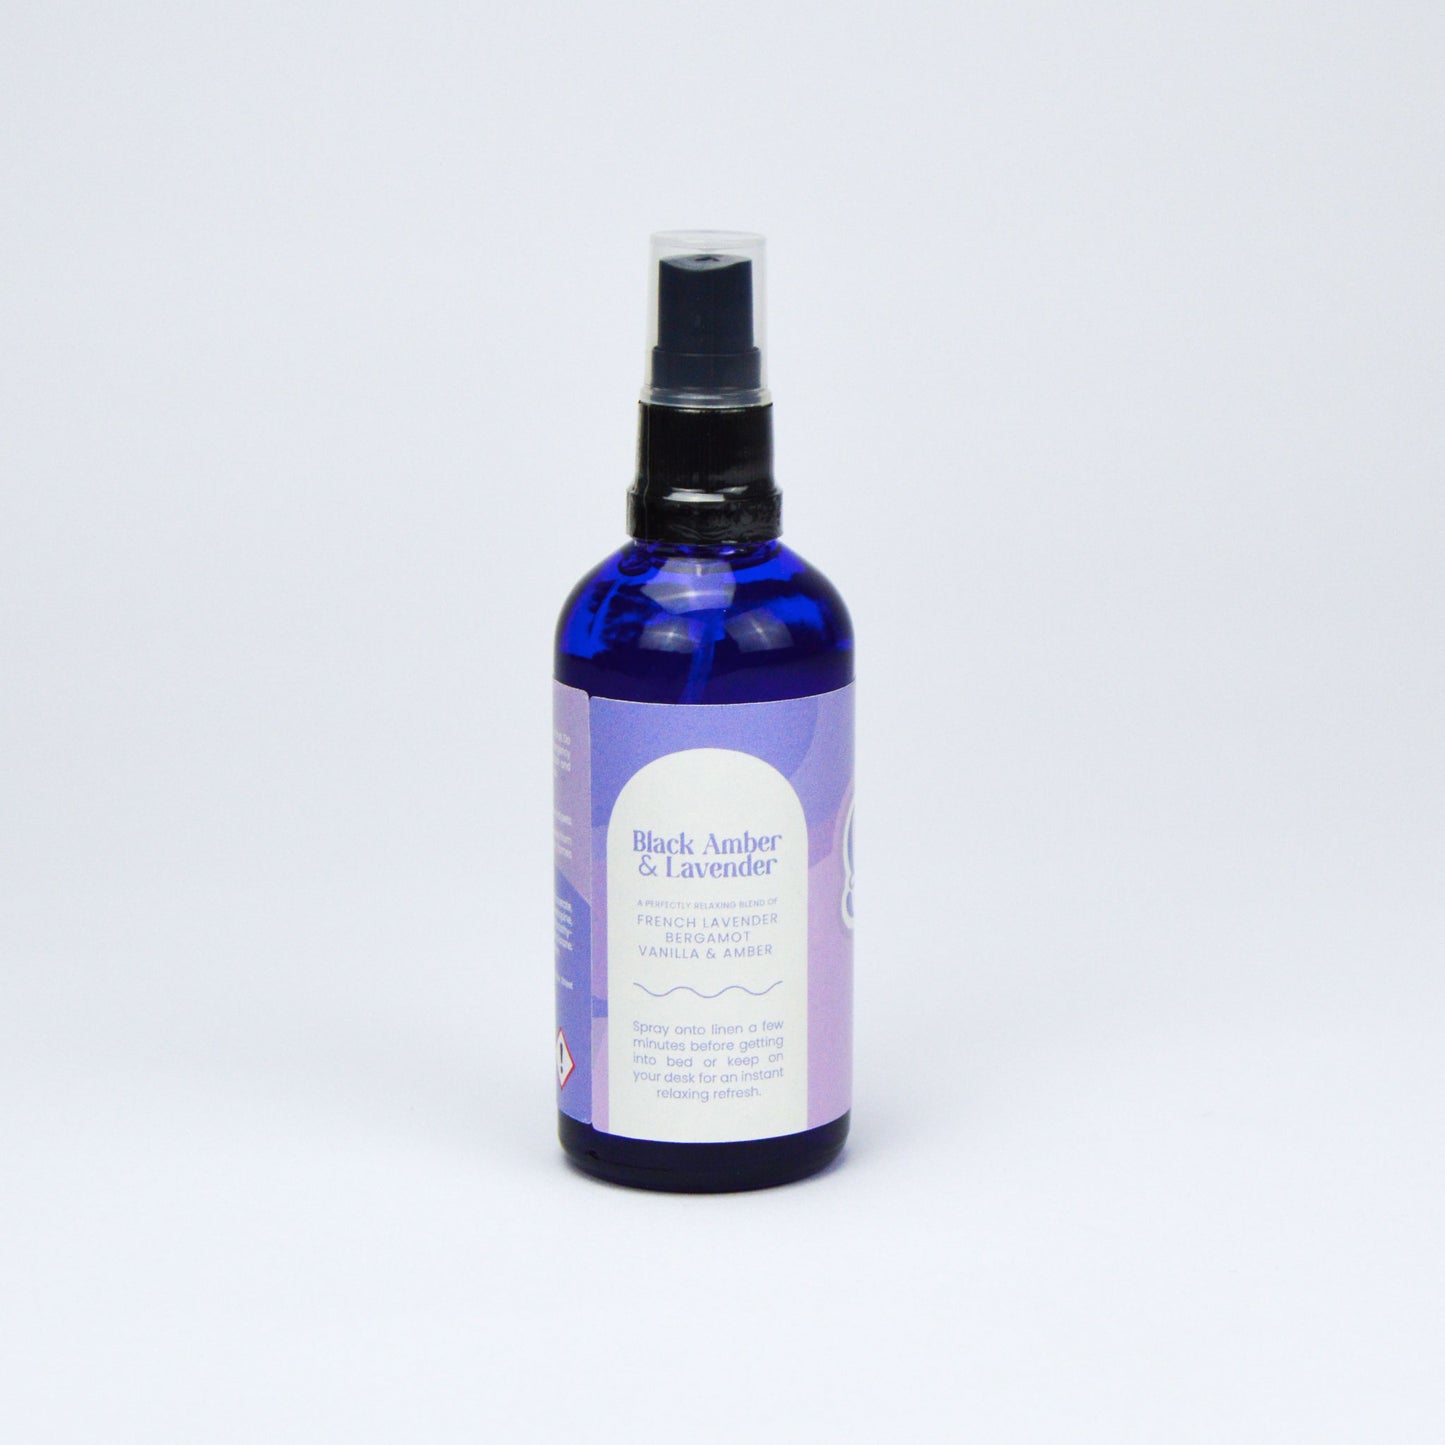 Black Amber and Lavender Pillow and Mood Relaxer Spray